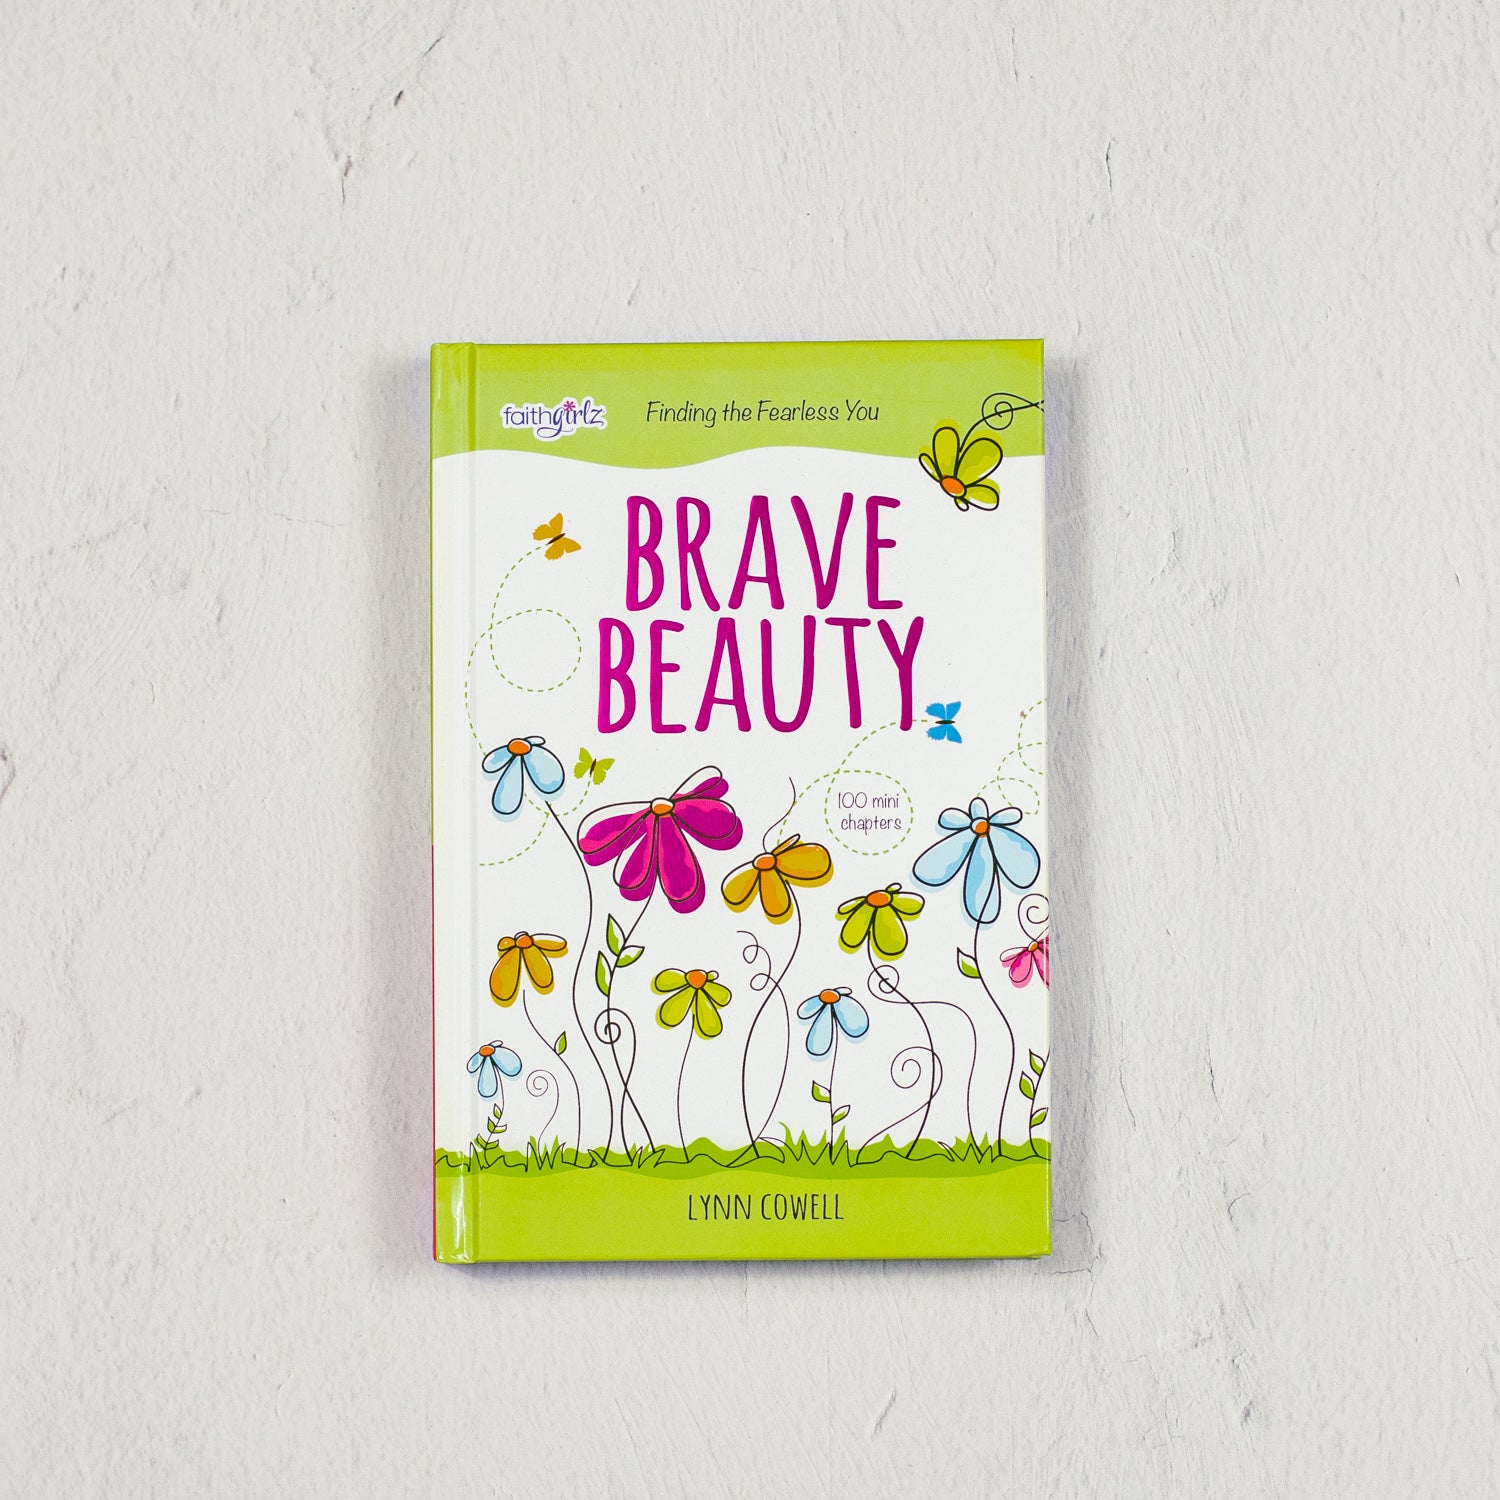 Fearless　Brave　P31　–　Bookstore　Beauty:　the　Finding　You